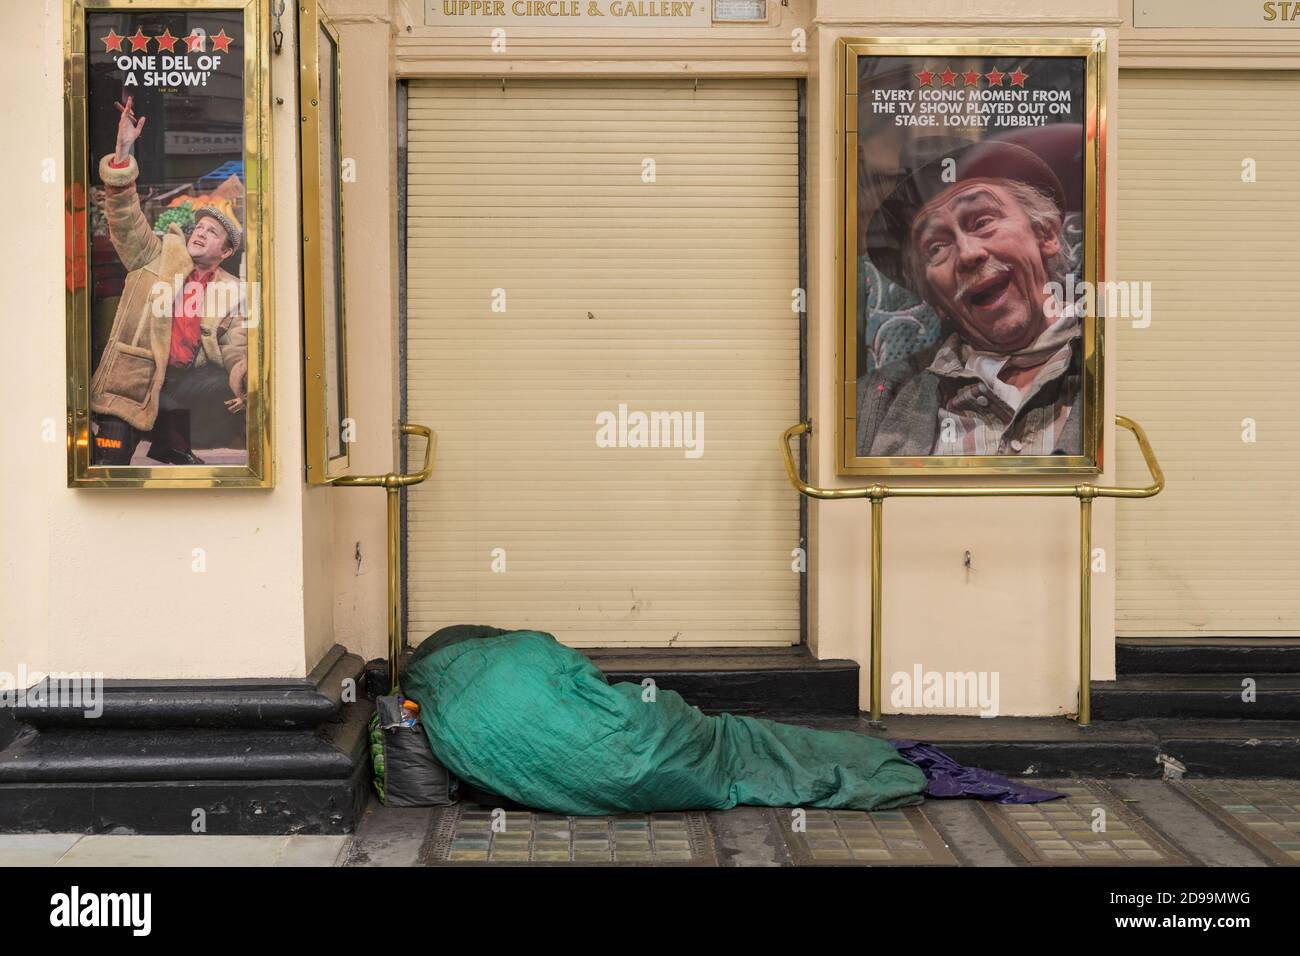 Homeless person sleeping in a sleeping bag on the steps outside a closed theatre. London Stock Photo